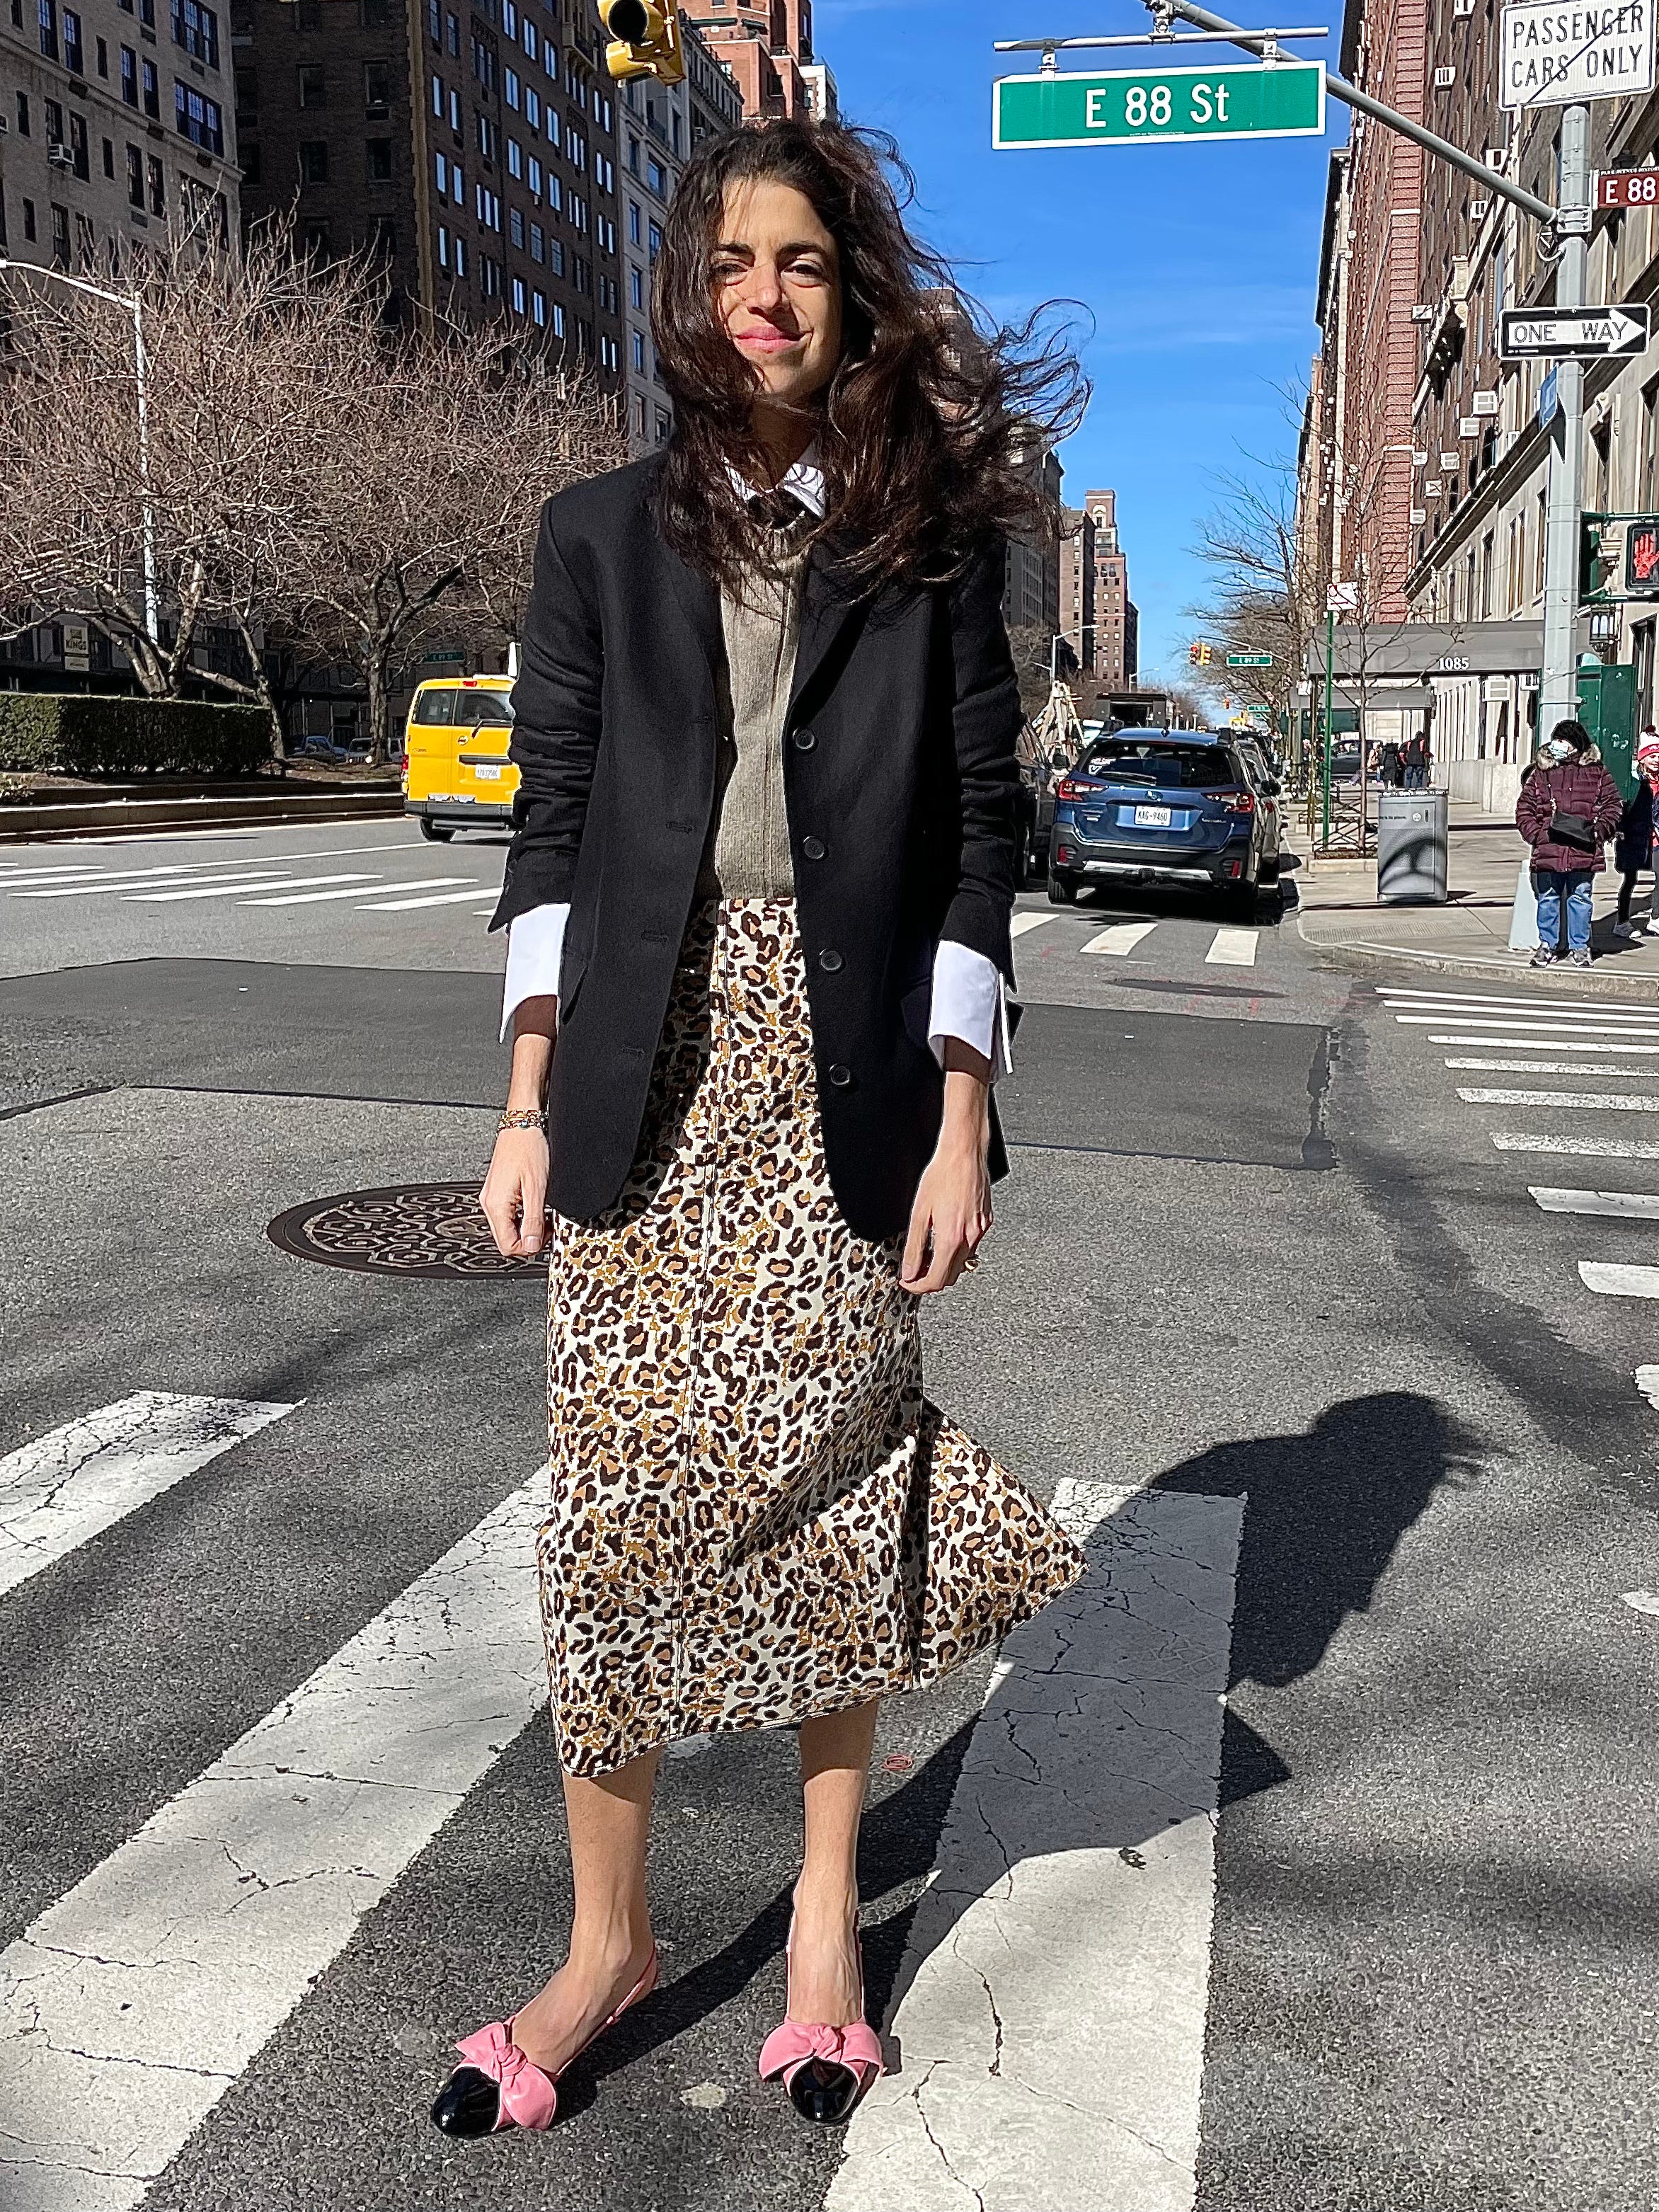 Is leopard print a trend? Here's how to wear it